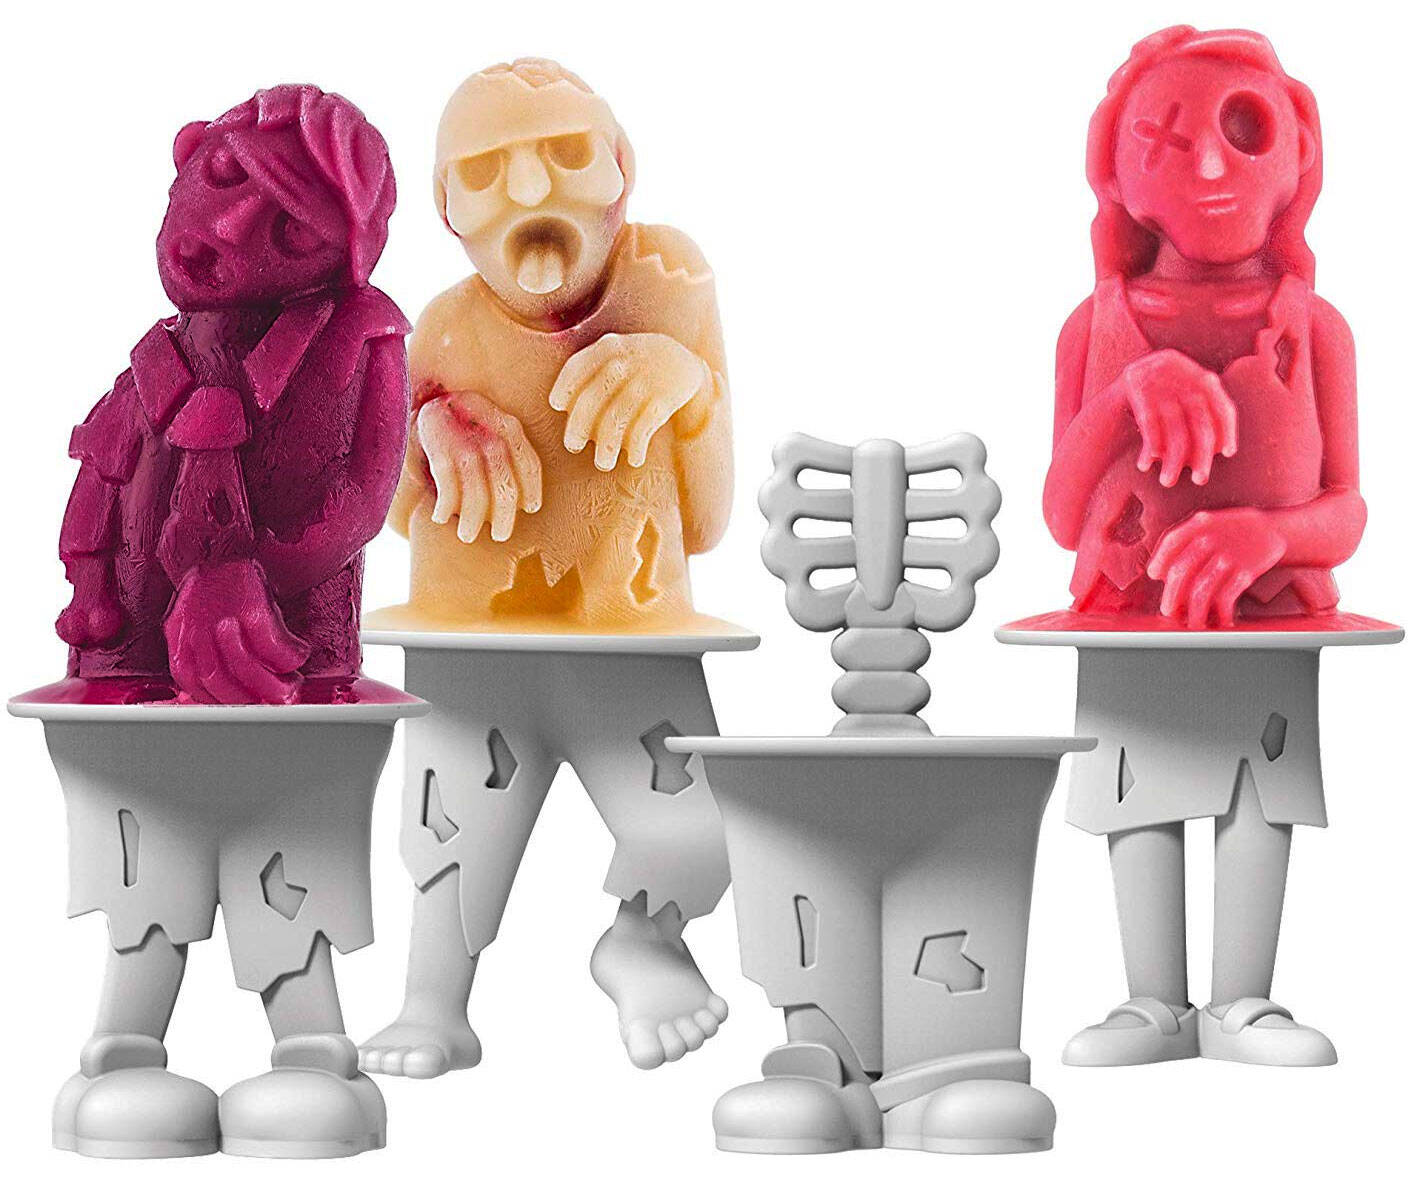 Zombie Ice Pop Molds - //coolthings.us